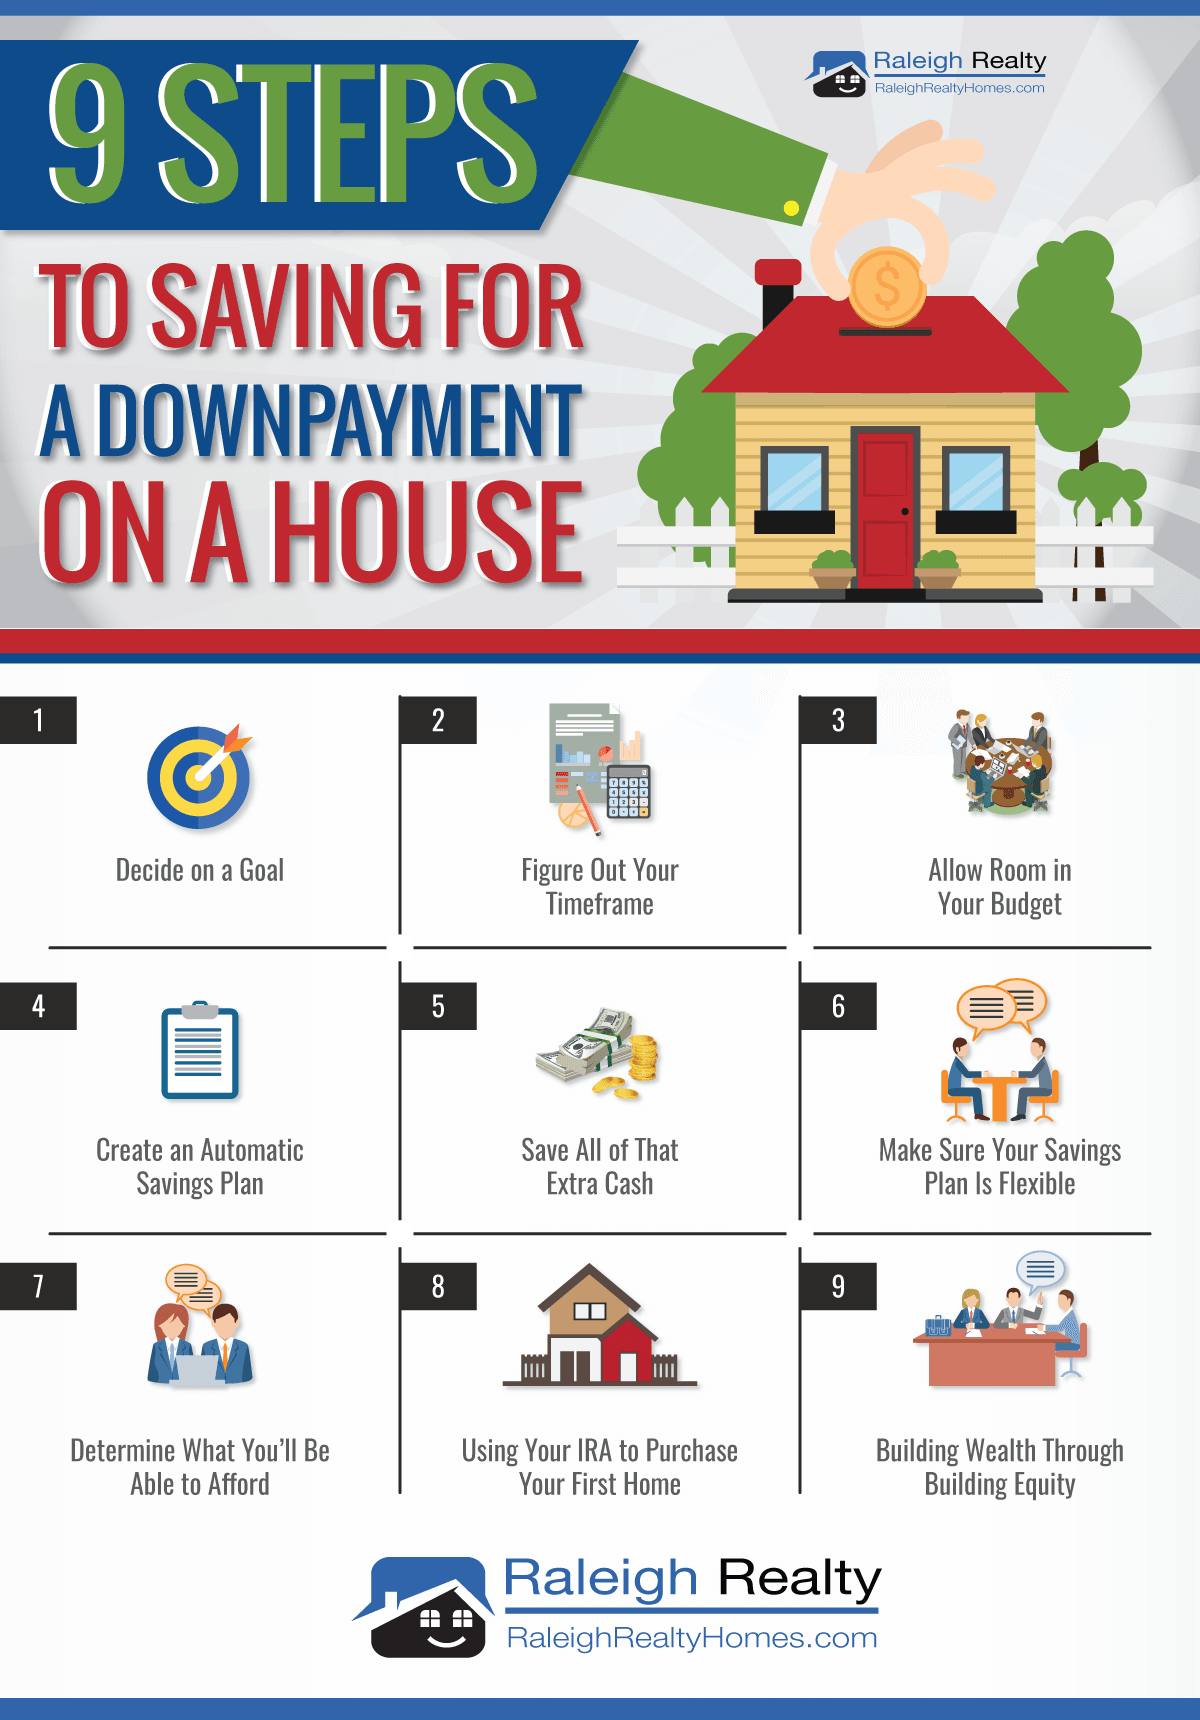 Saving for a Downpayment on a House